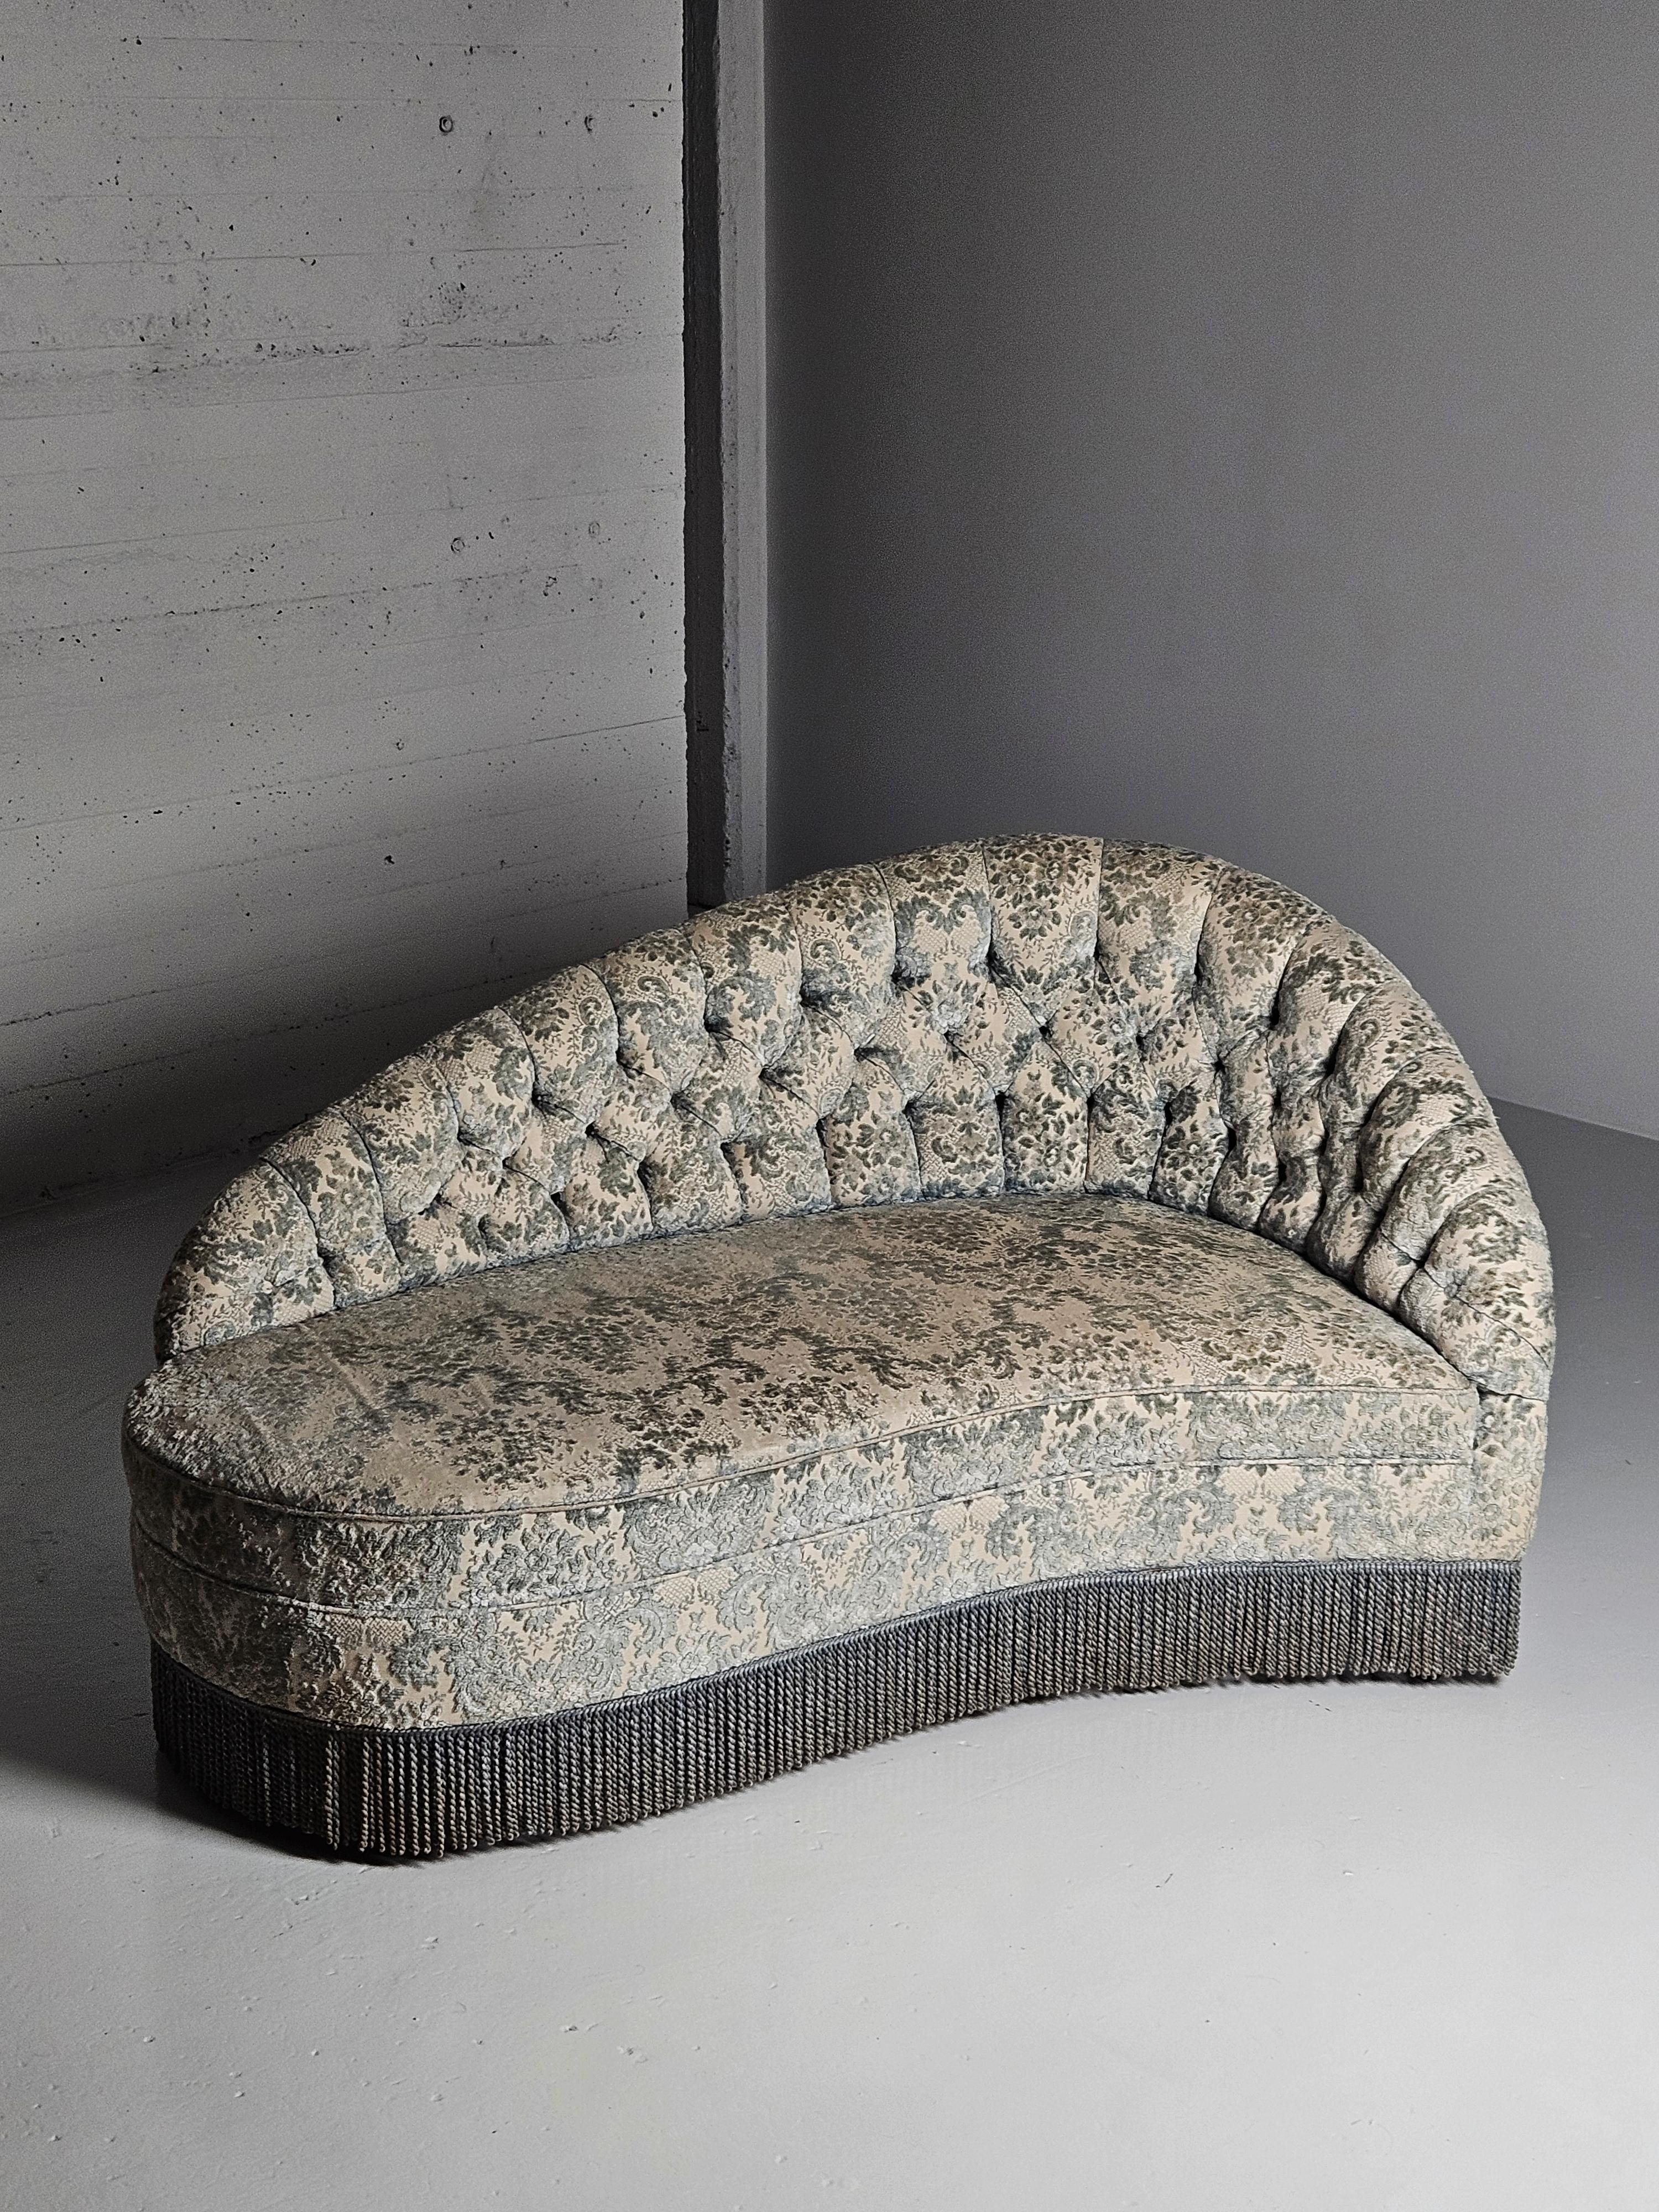 Scandinavian modern daybed or canapé designed by Carl Cederholm for Firma Stil & Form. Stockholm, Sweden, 1940s-1950s.

Original fabric with some stains. 